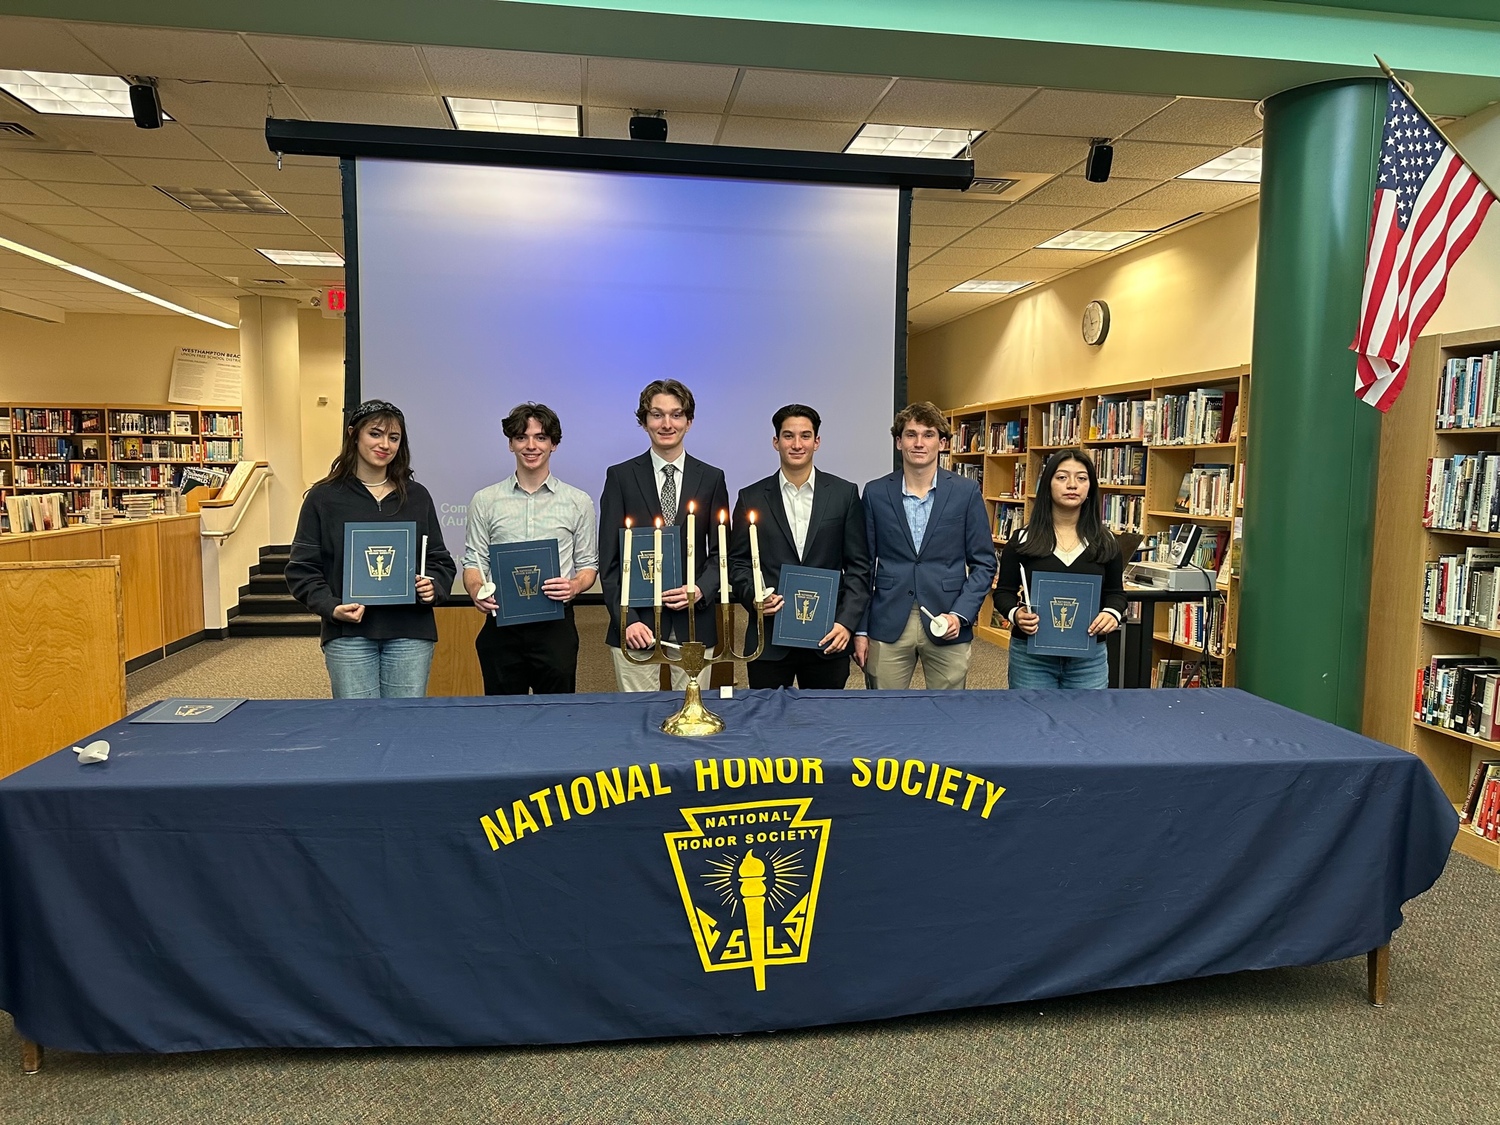 Seven students were inducted into the Westhampton Beach High School National Honor Society during a recent fall ceremony. The new members were inducted in recognition of their demonstrated excellence in service, character, scholarship and leadership. The inductees are Rebecca Gutierrez-Haefeli, Zachary Horton, Tyler O’Donnell, Nicholas Rizzo, Heath Sumwalt, Ashley Vasquez Sanic and Evan Zheng. COURTESY WESTHAMPTON BEACH SCHOOL DISTRICT